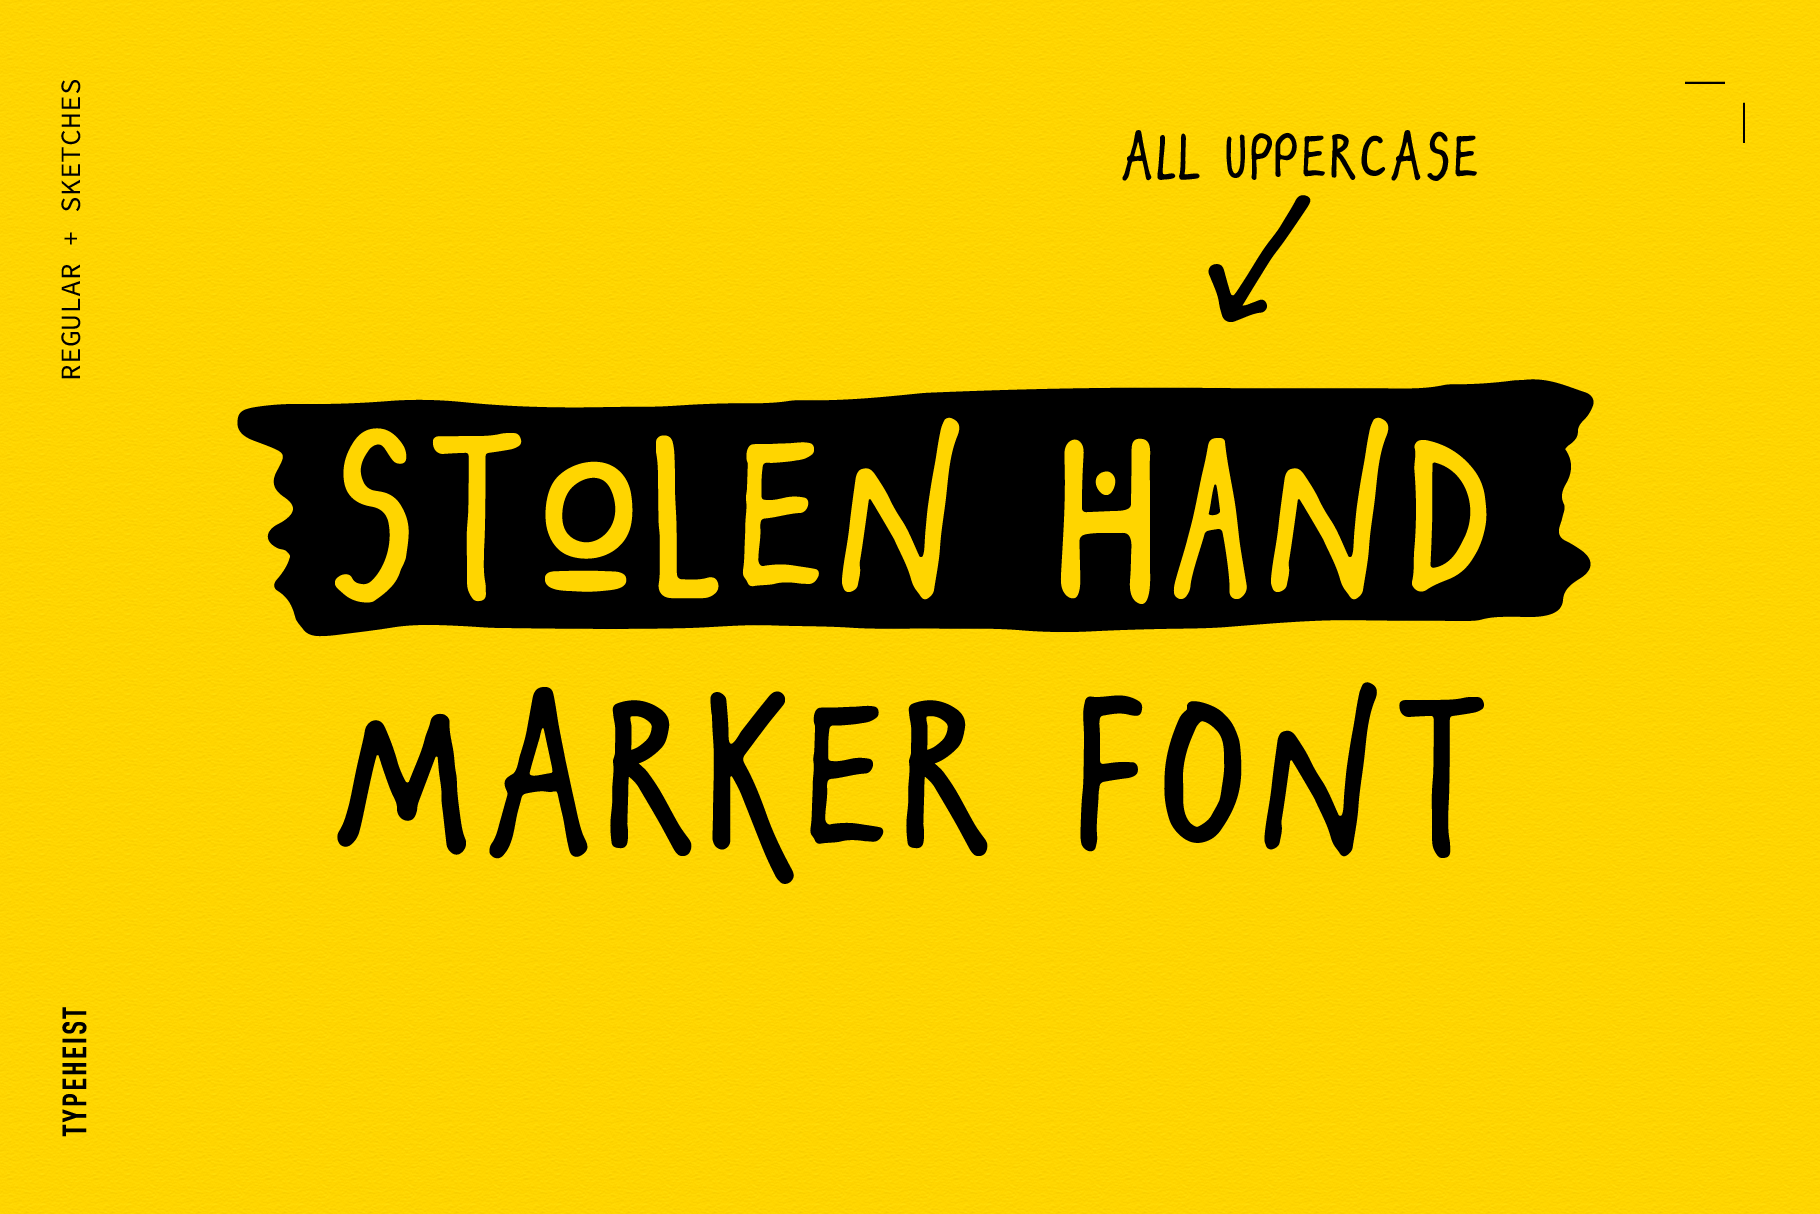 Stolen Hand: An effortlessly cool and casual marker font